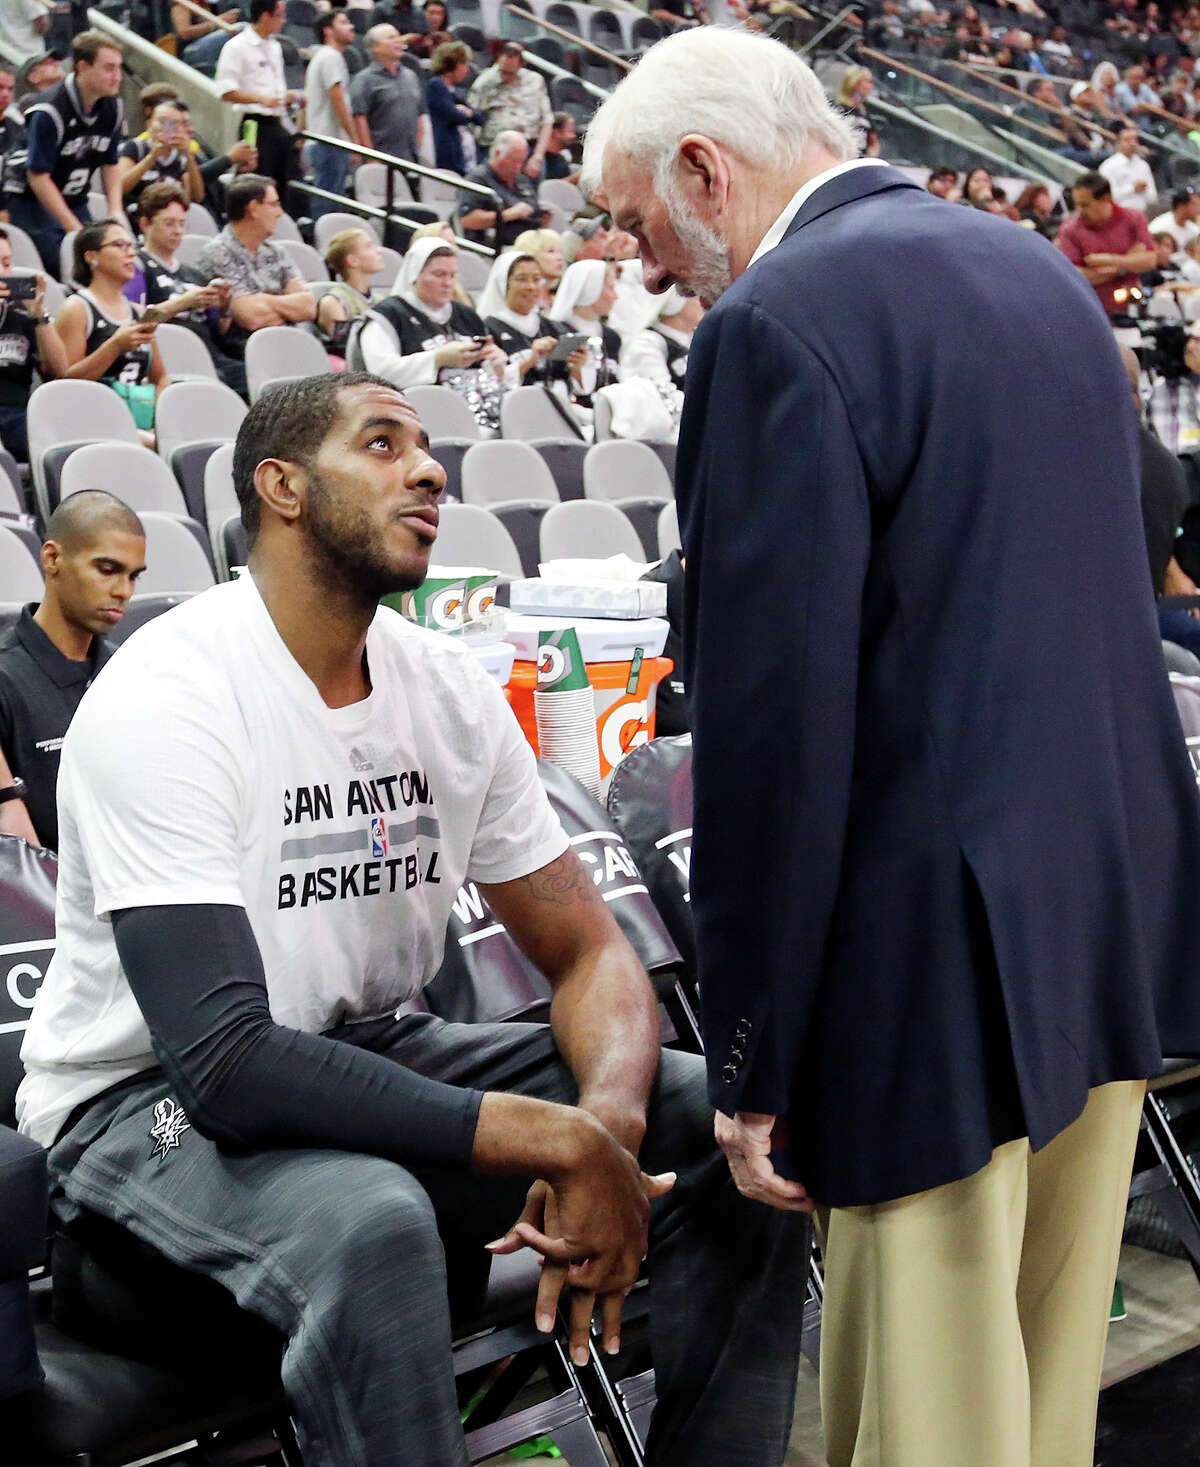 Spurs Coach Gregg Popovich contributed to the outpouring of support shown to LaMarcus Aldridge following his abrupt retirement decision due to a health condition.he game with the Pistons Sunday Oct. 18, 2015 at the AT&T Center.